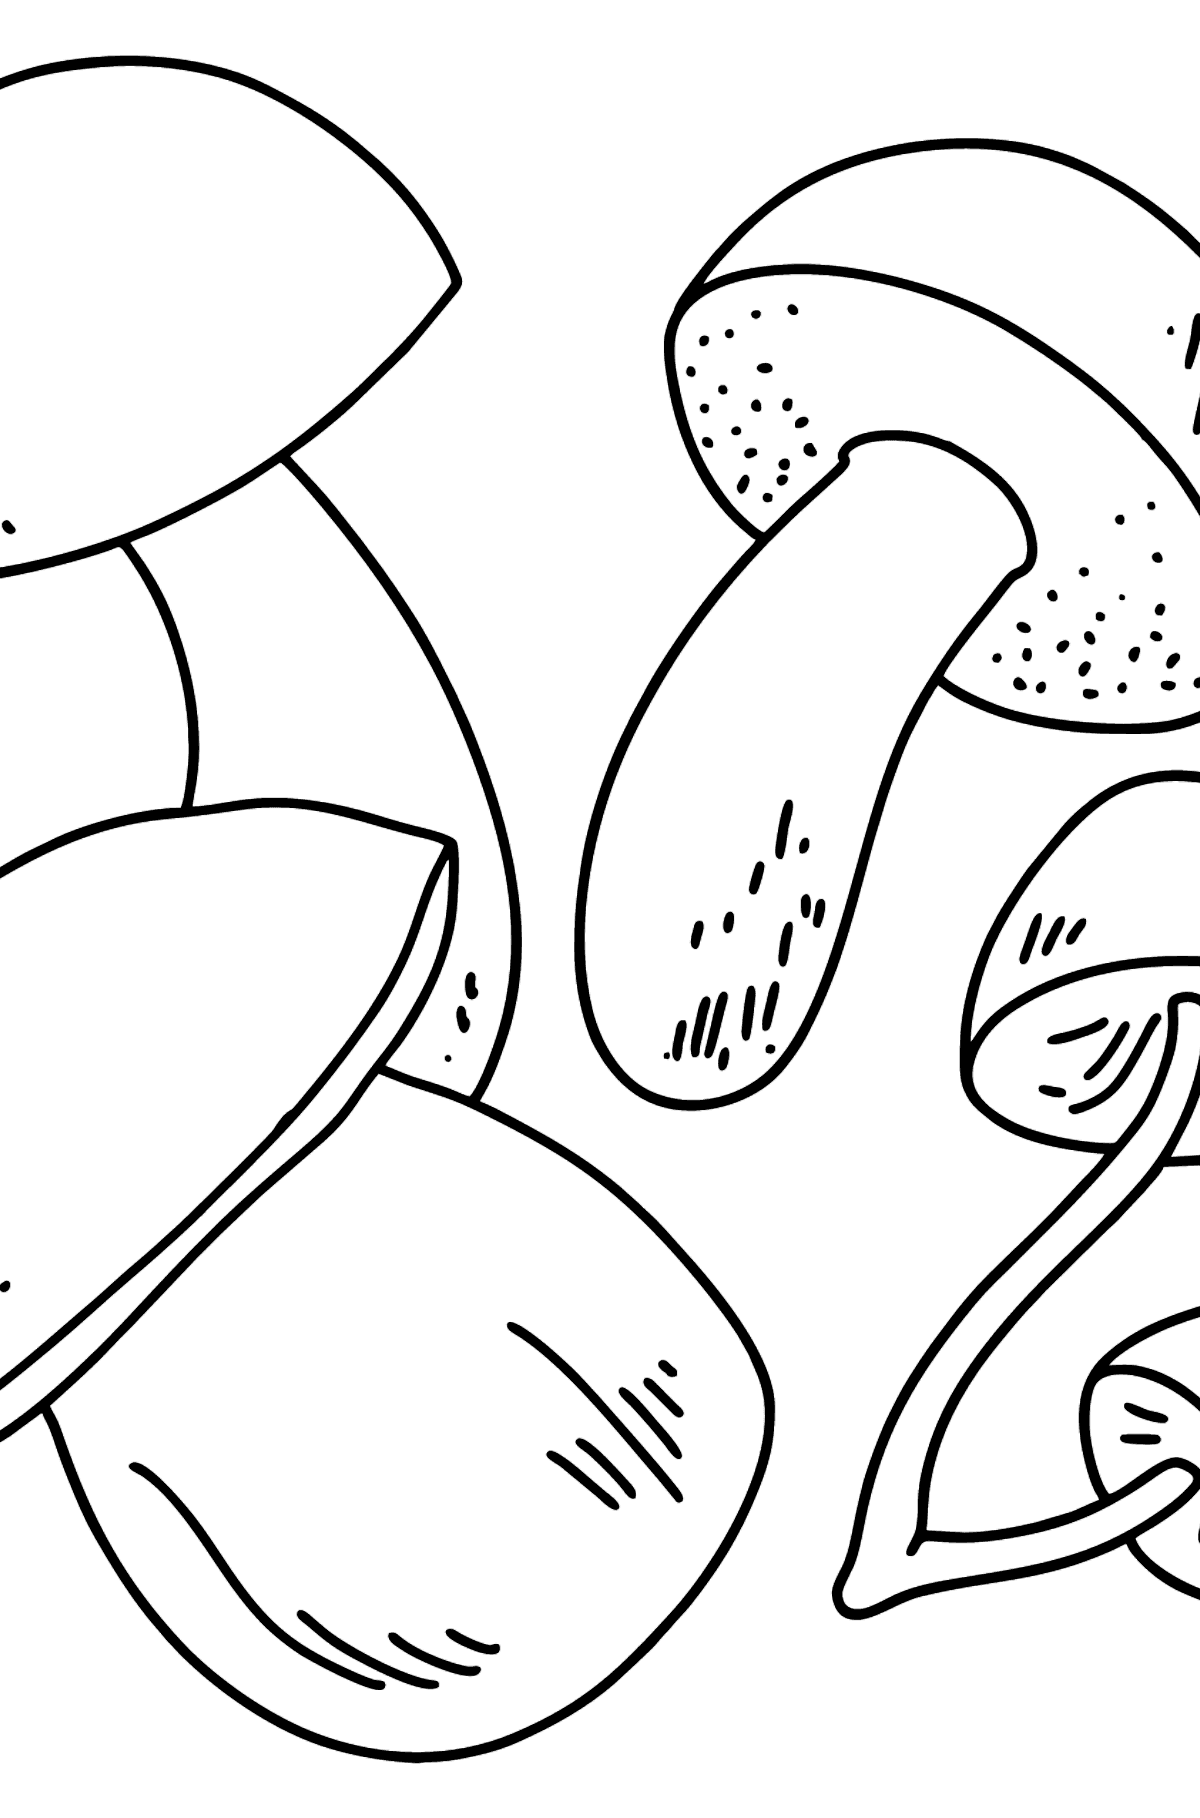 Mushrooms coloring: white, boletus, honey mushrooms - Coloring Pages for Kids